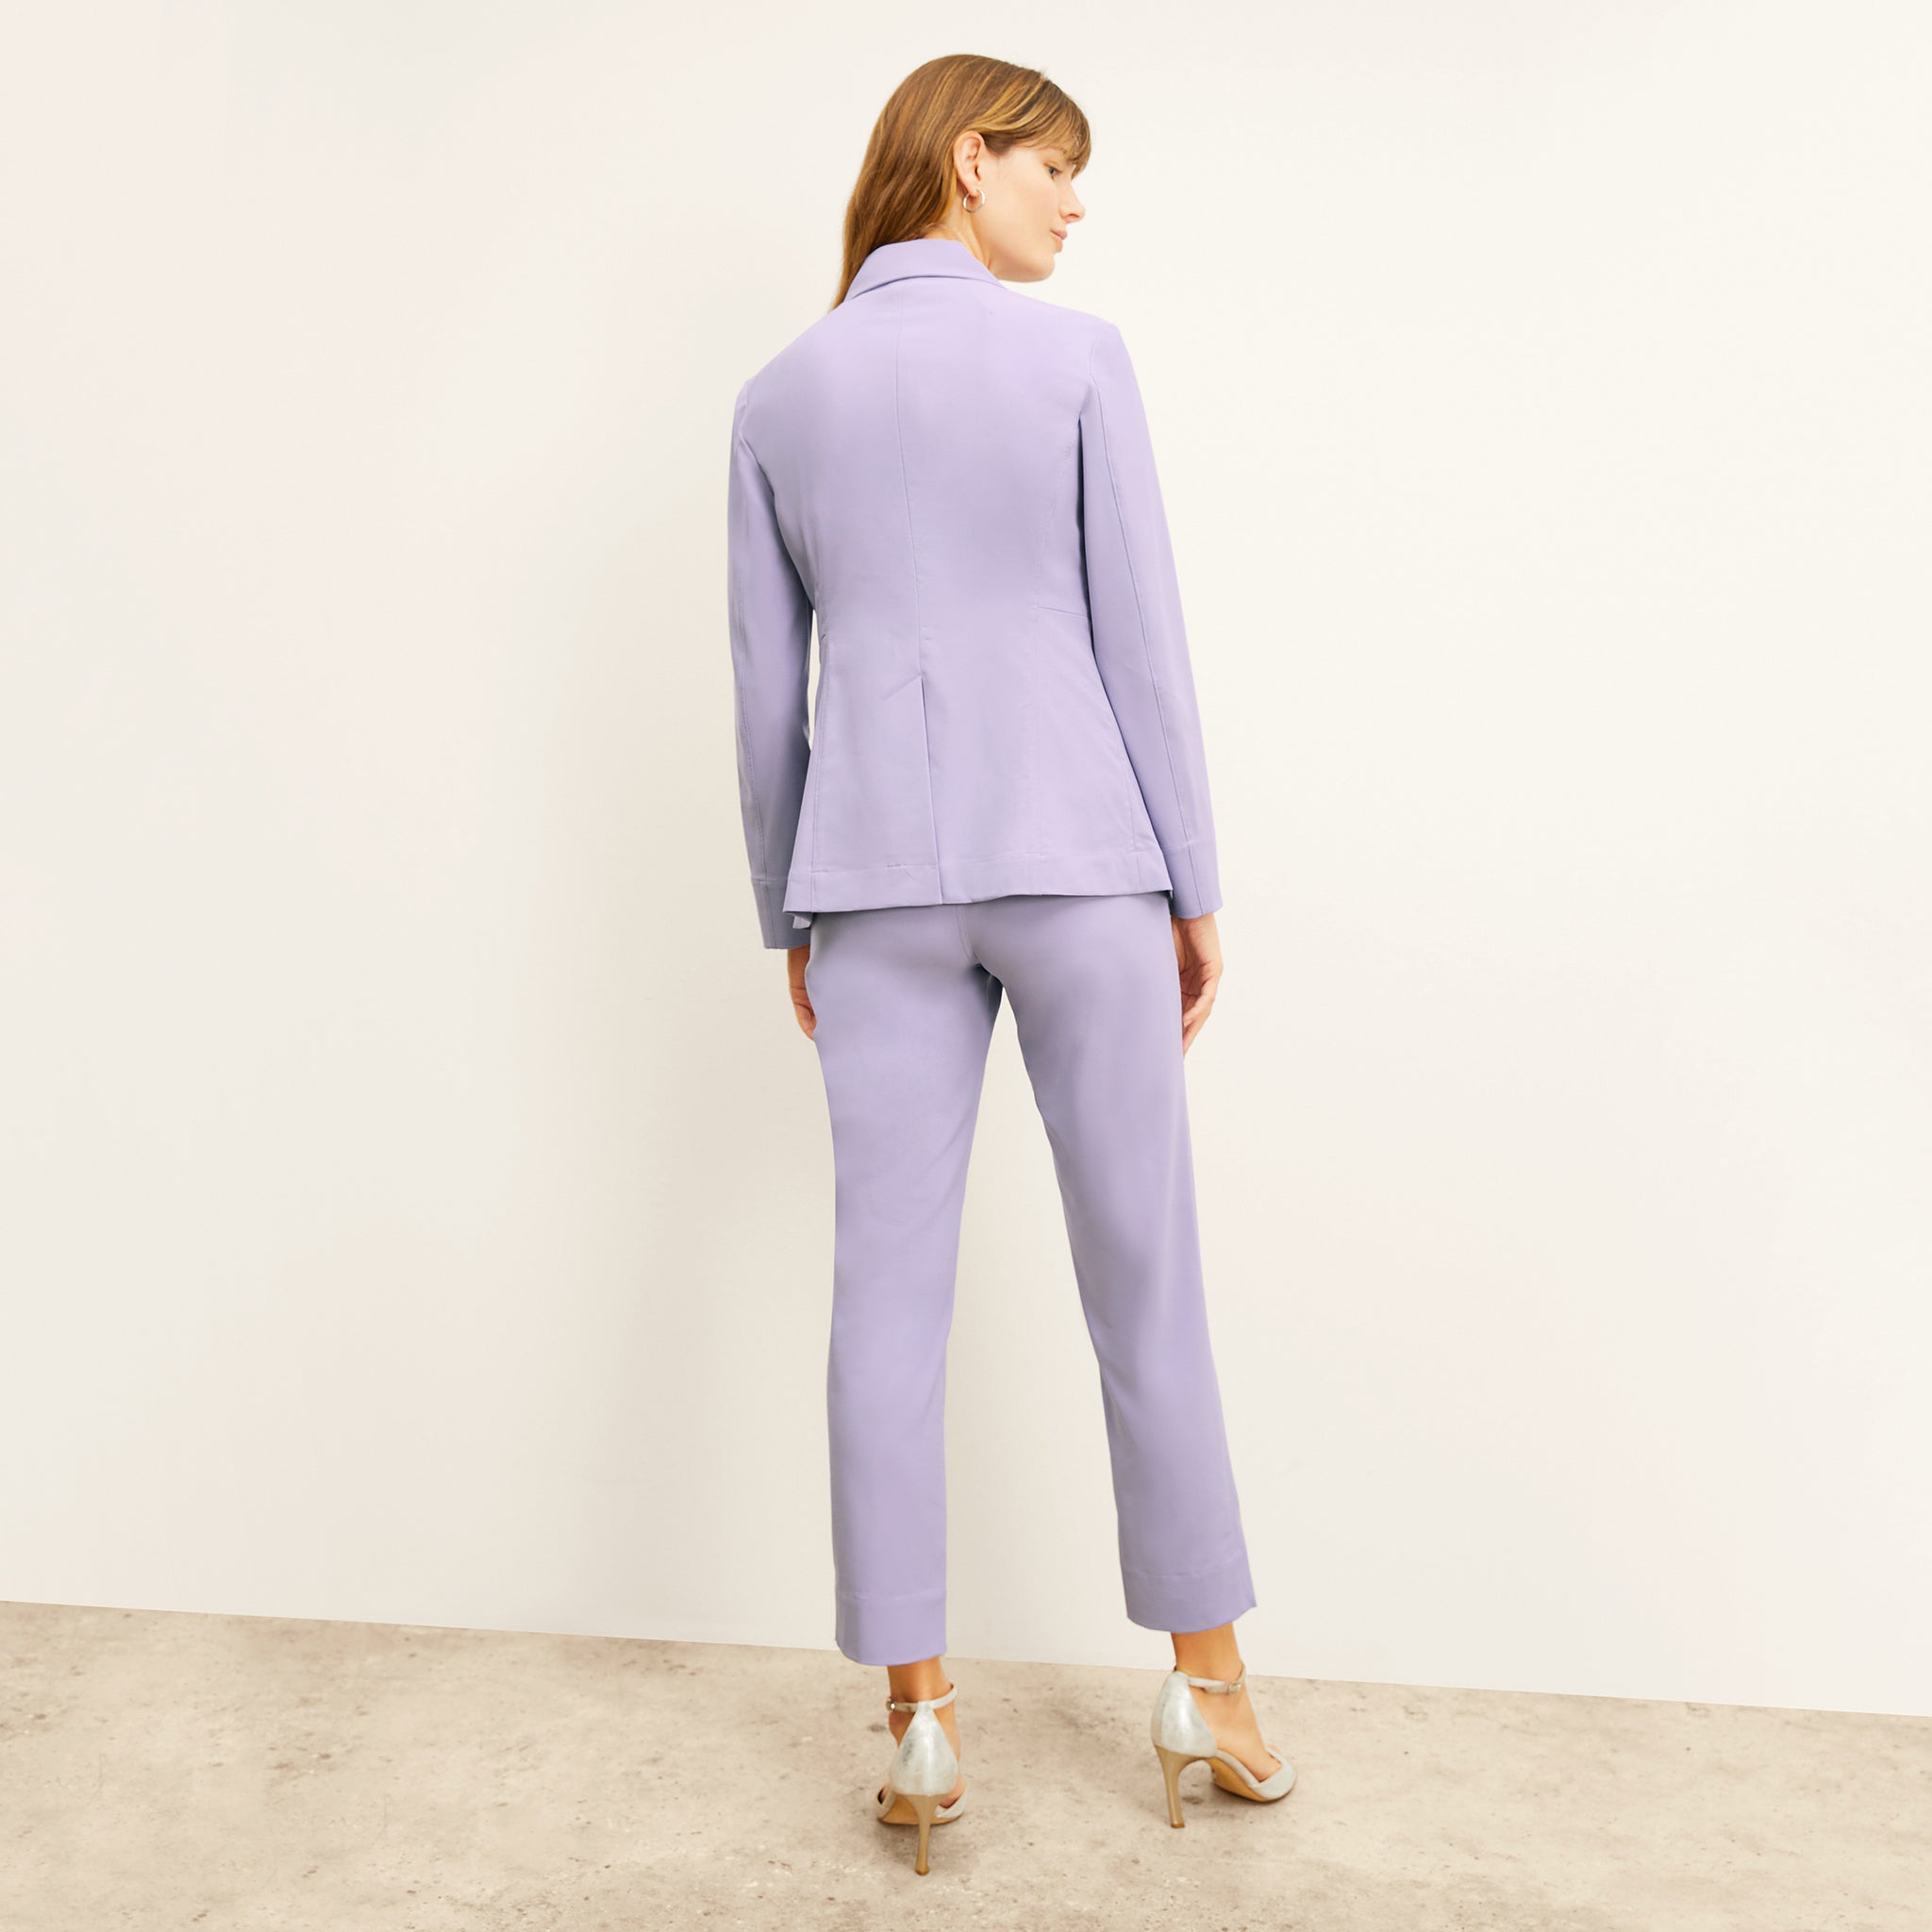 back image of a woman wearing the moreland jacket in light orchid 